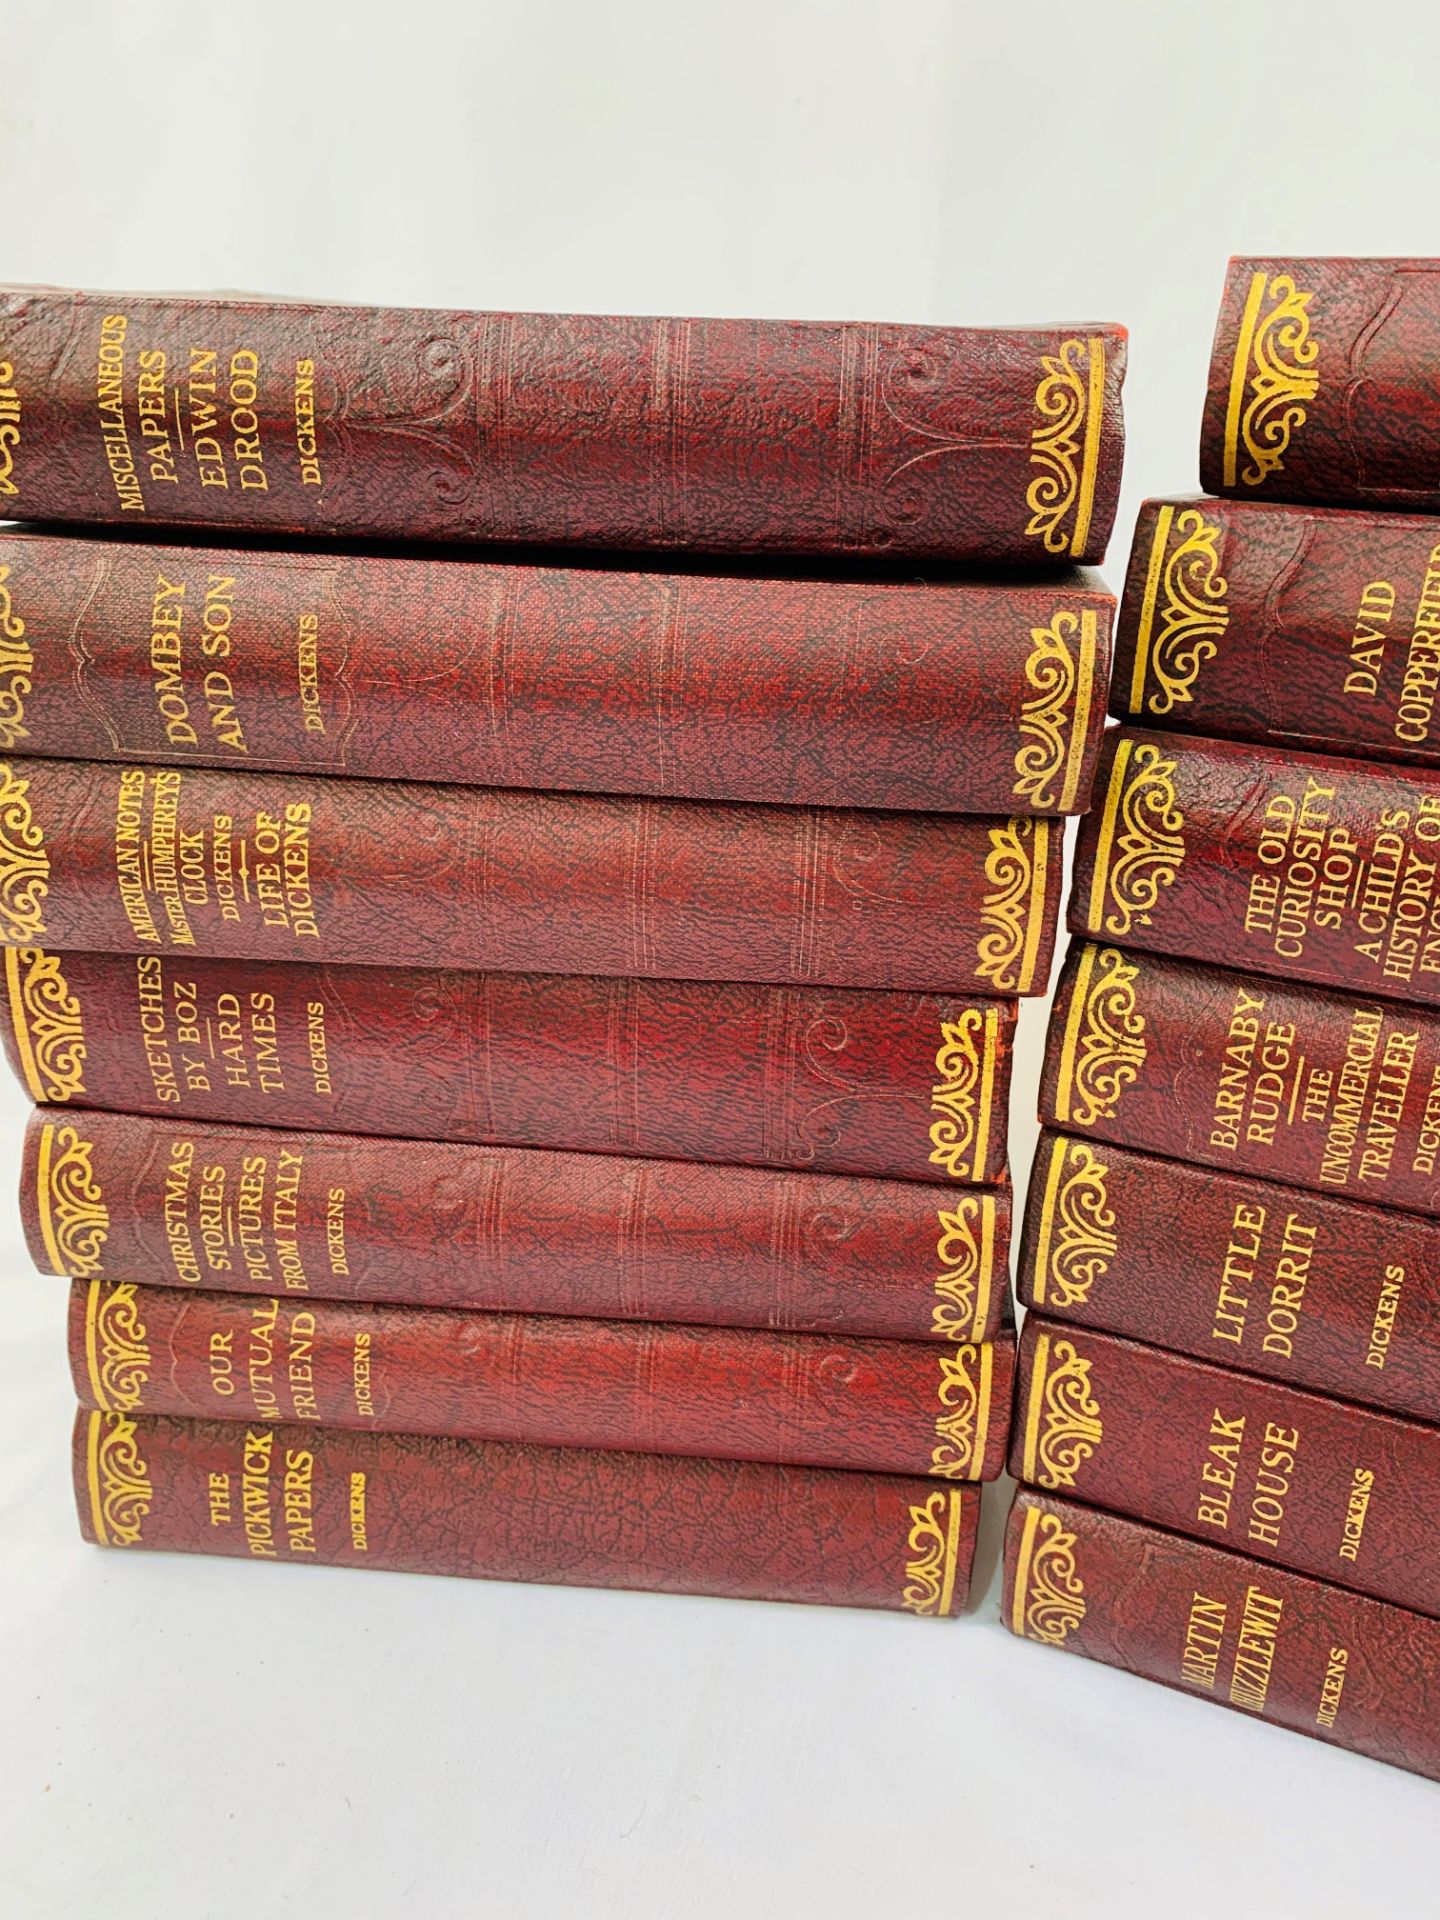 Collection of Dickens novels published by Hazell, Watson, Viney. - Image 3 of 3